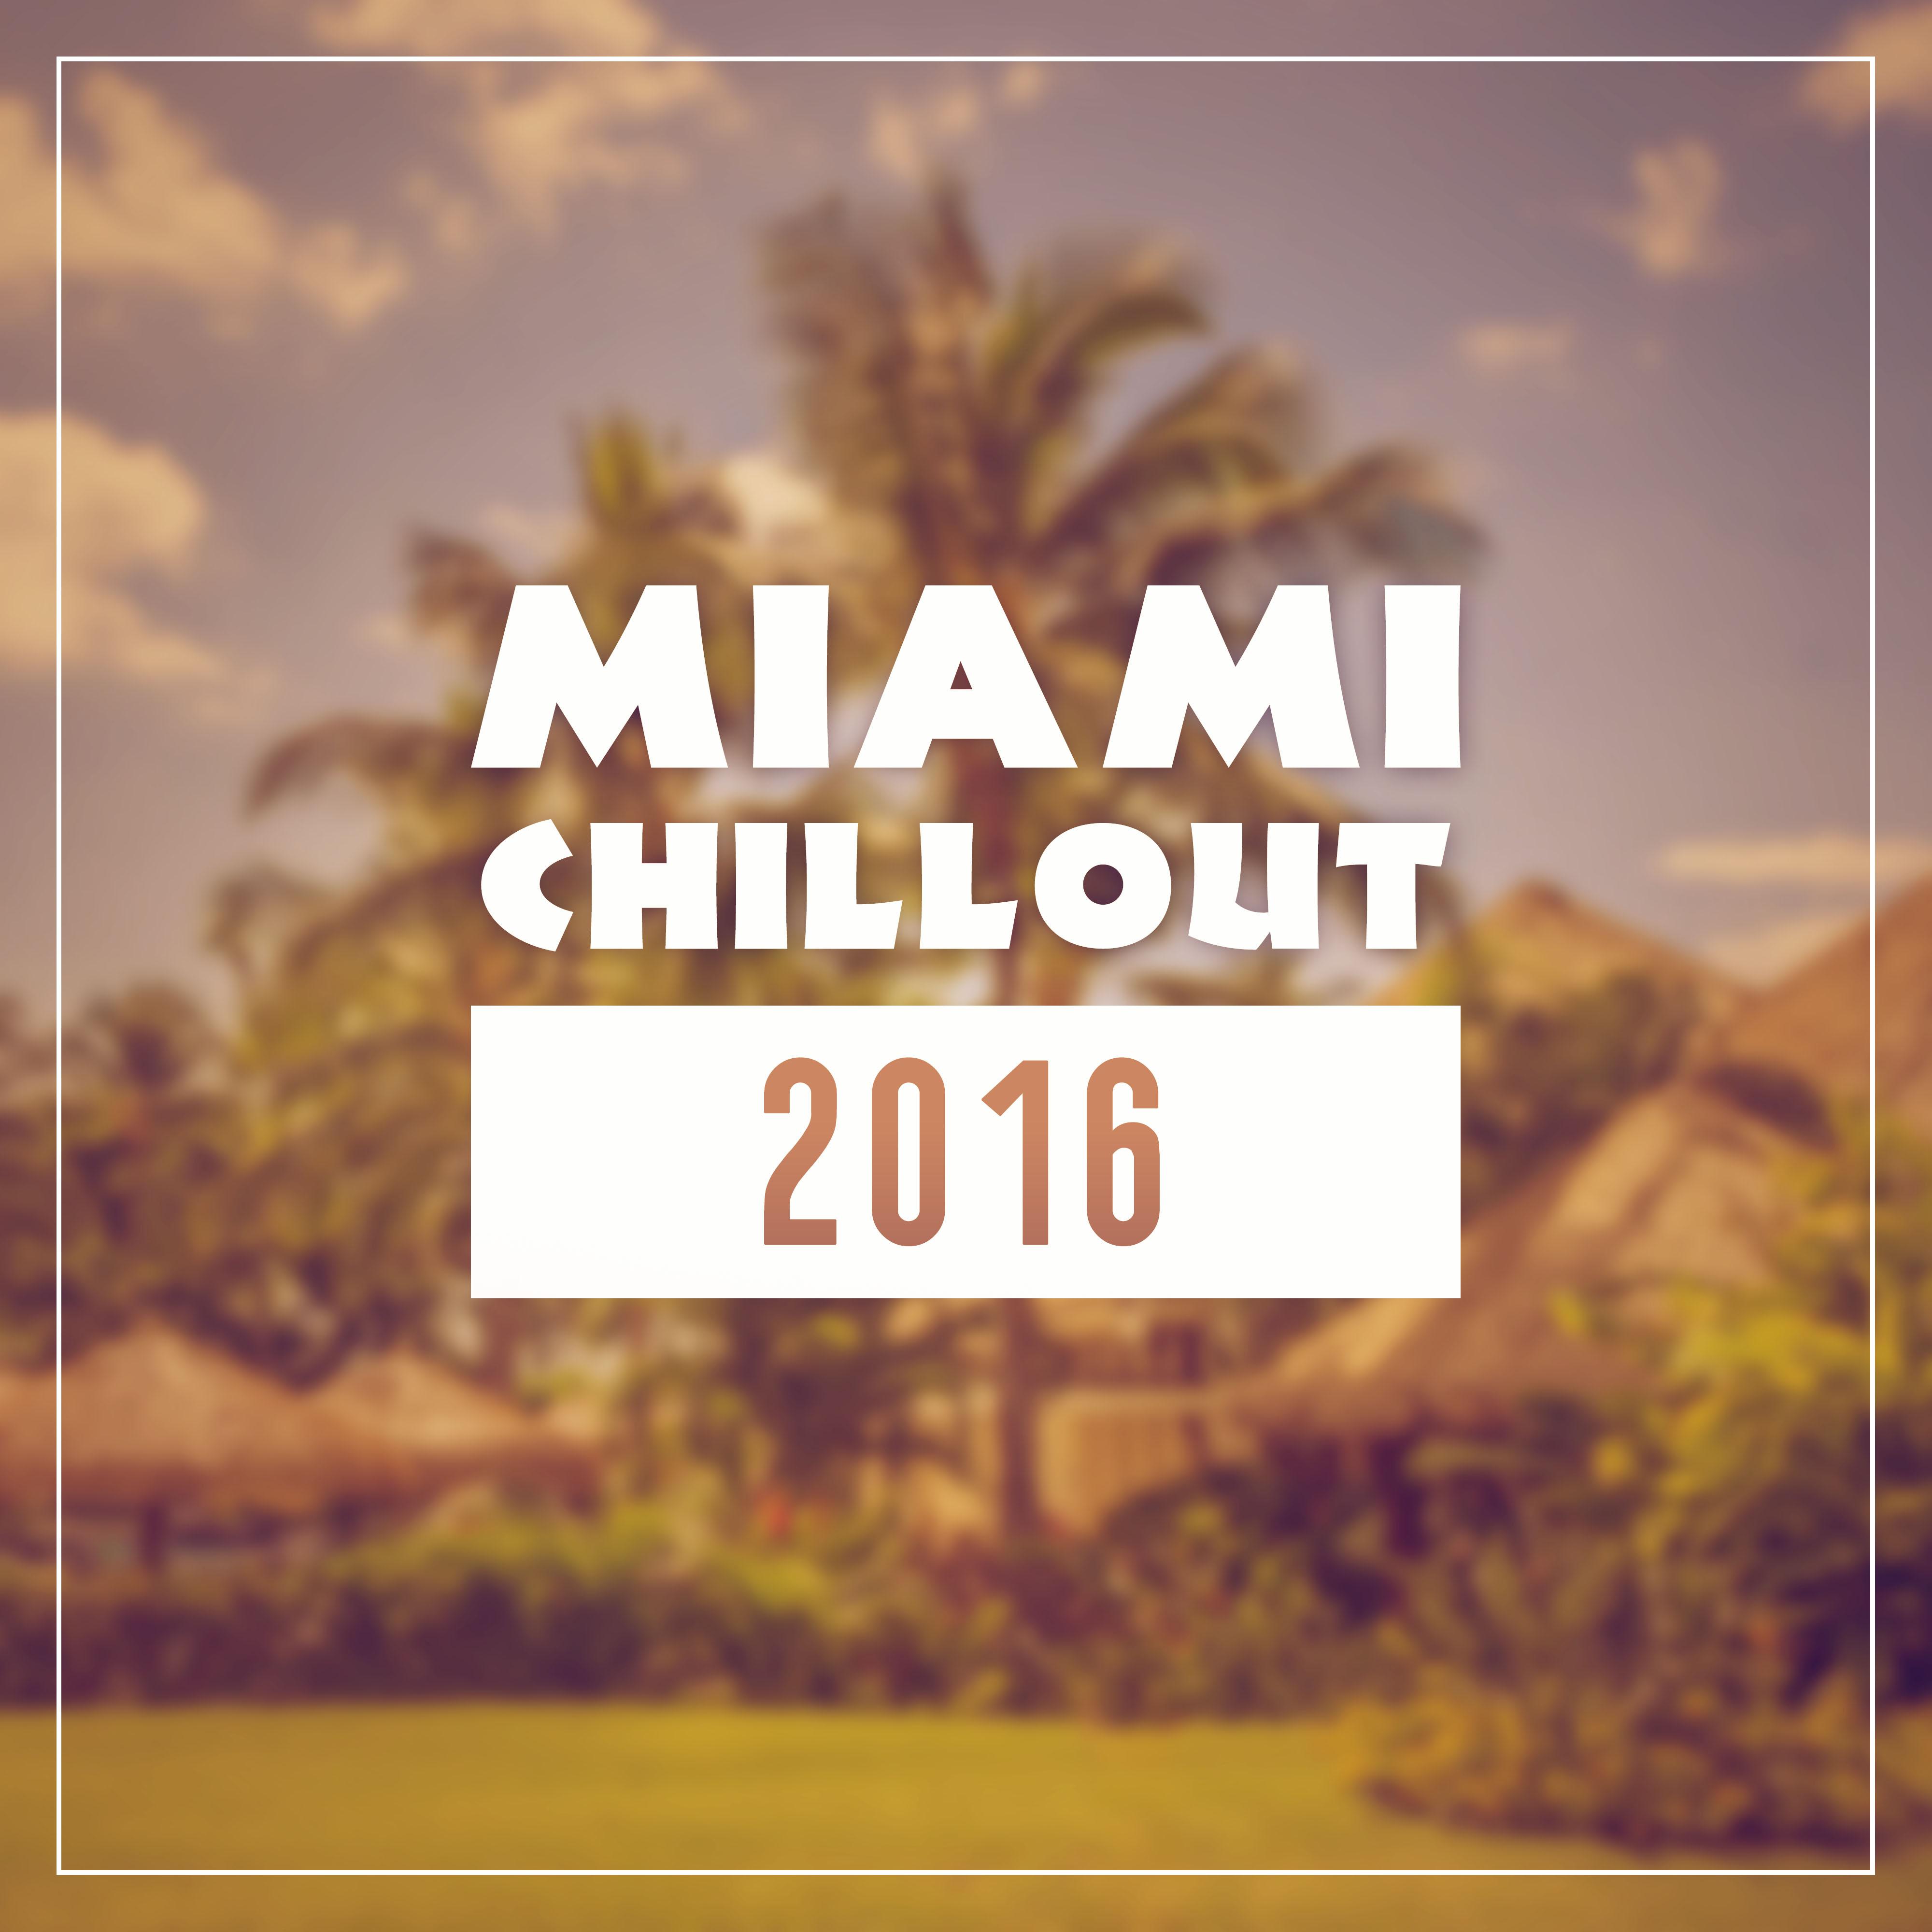 Miami Chillout 2016 – Miami Lounge, Bar on the Beach, Selected Chill Out,  Hot Music, Relaxation, Beach Music, Summer Music